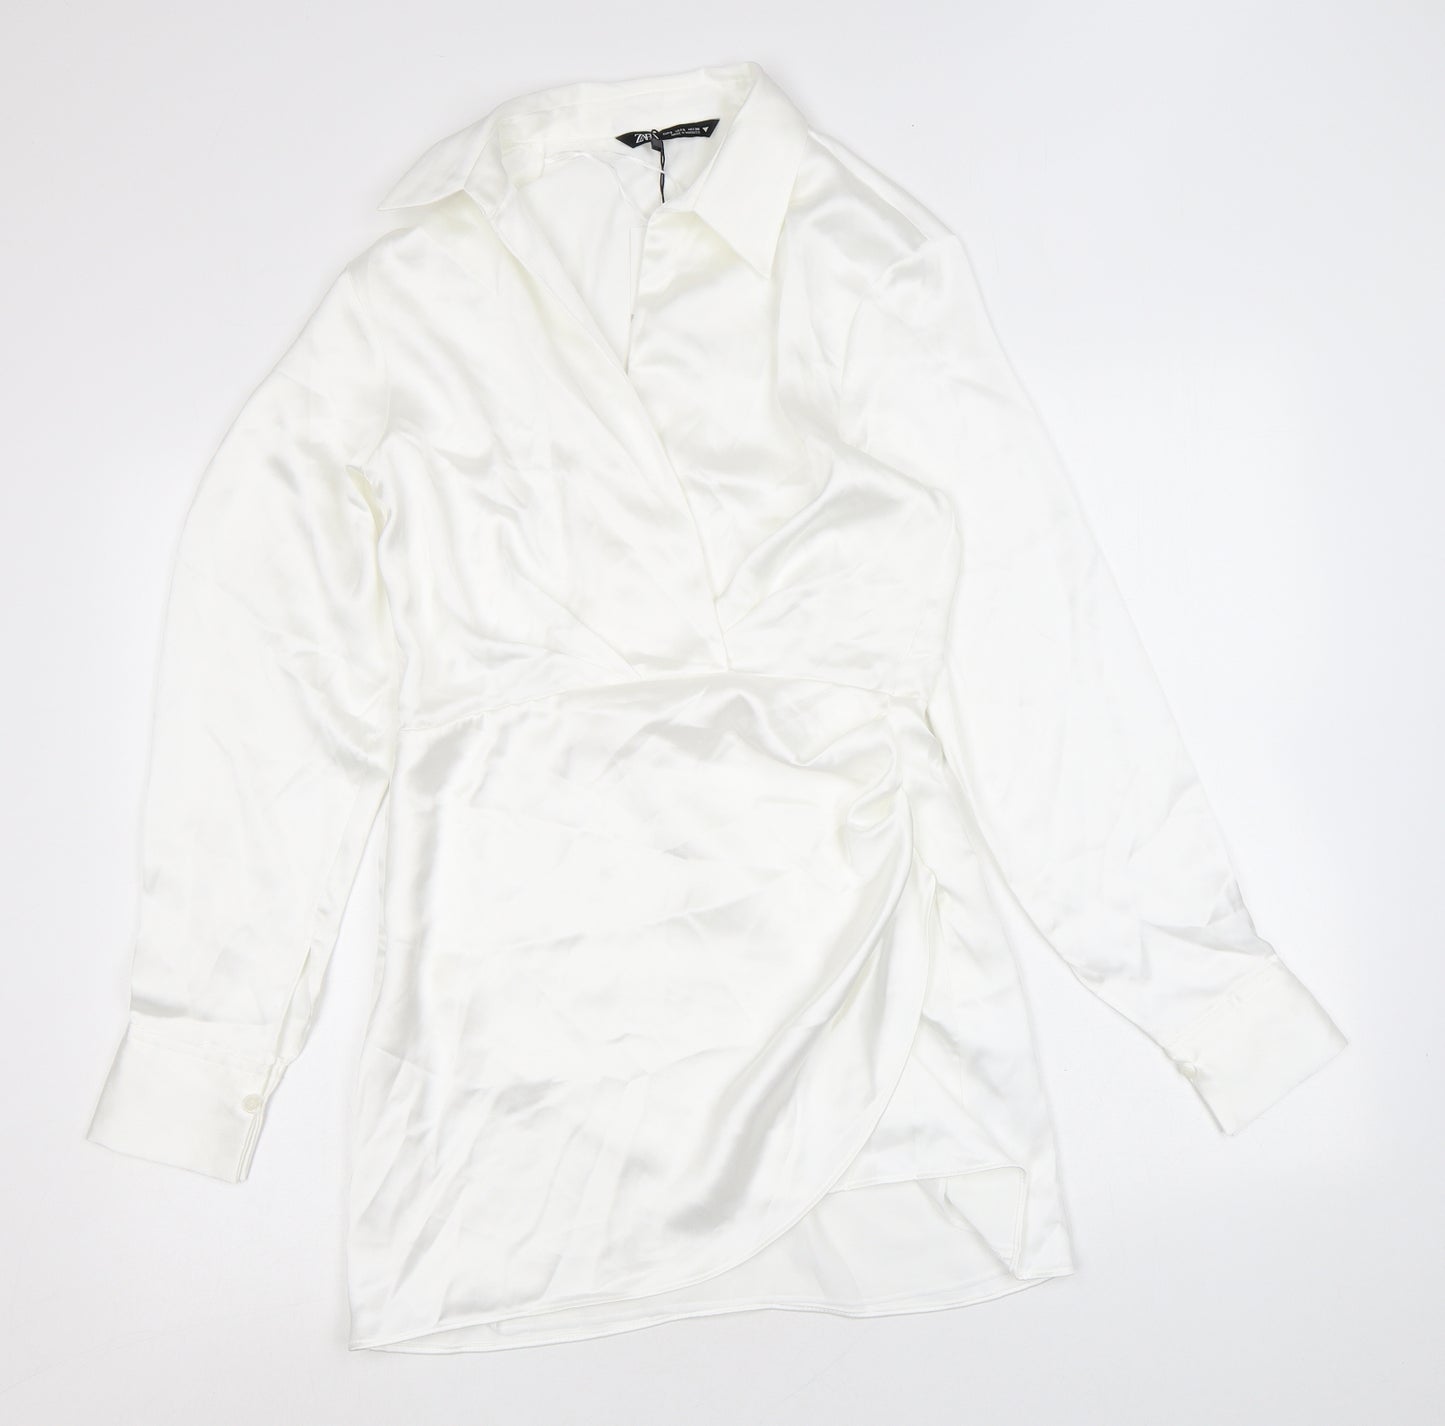 Zara Womens White Polyester A-Line Size S Collared Zip